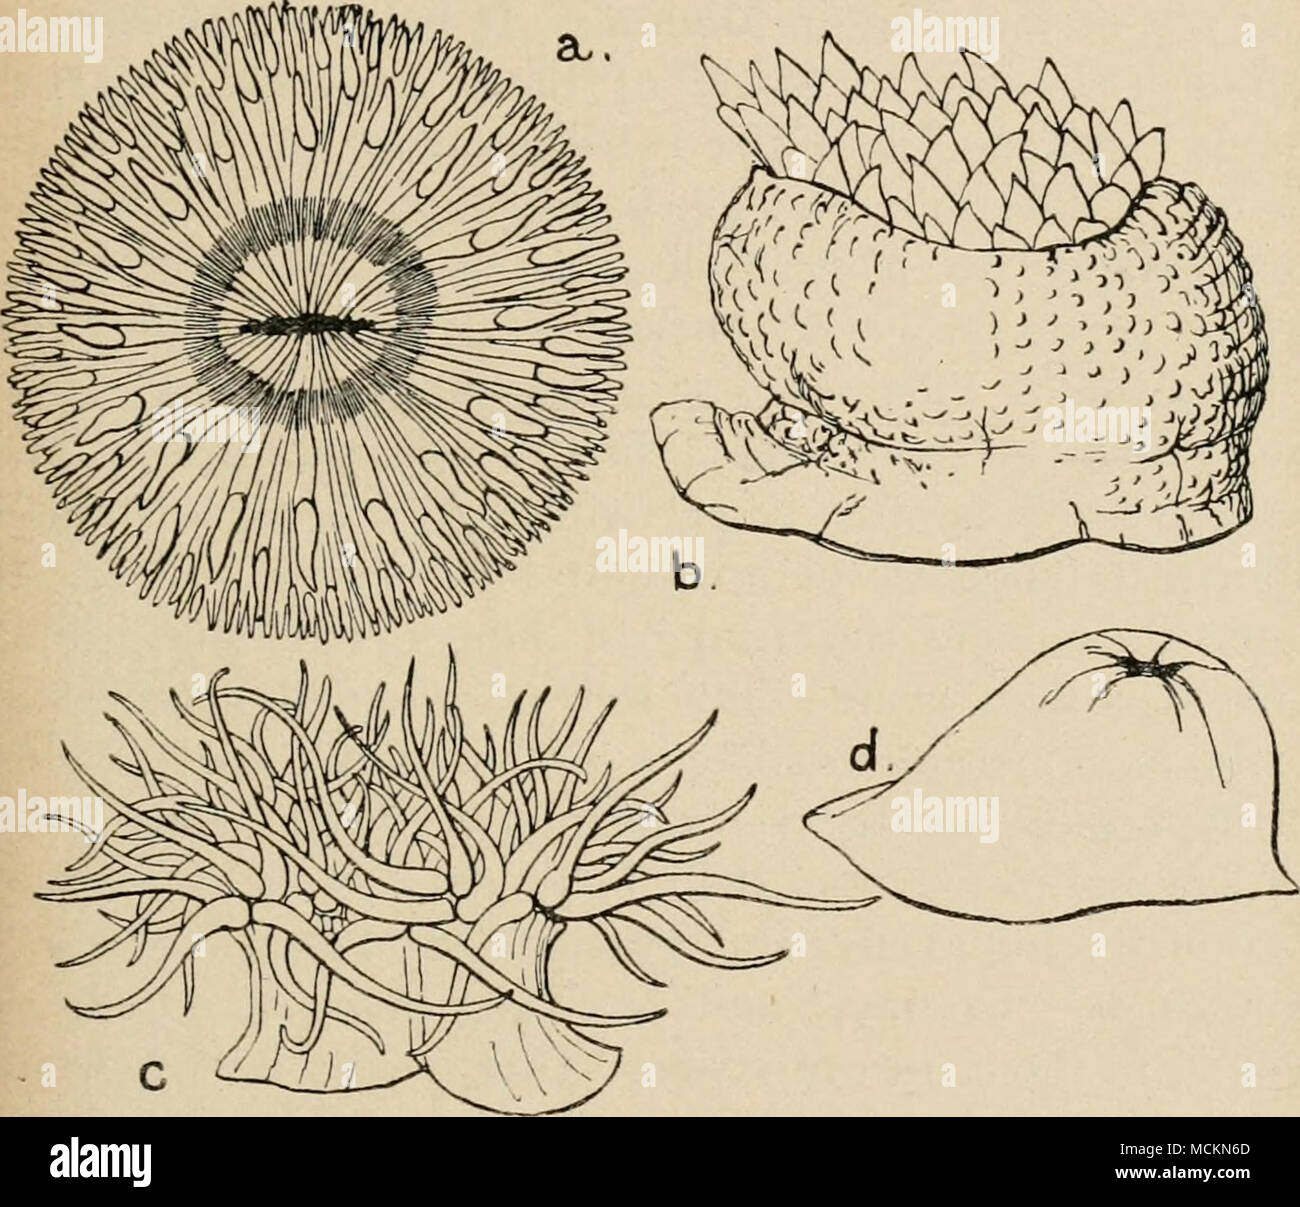 . Fig. 6.—British Sea-Anemones. a, Sagartia bellis, the daisy anemone, viewed from above when fully expanded. b, Bunodes crassicornis, half expanded ; side view. c, Anthea cereus. The tentacles are pale apple-green in colour, tipped with mauve, and cannot be completely retracted. d, Actinia mesembryanthemum. The disk of tentacles is completely retracted. This is the commonest sea-anemone on our South Coast, and is usually maroon colour, but often is spotted like a strawberry. Stock Photo